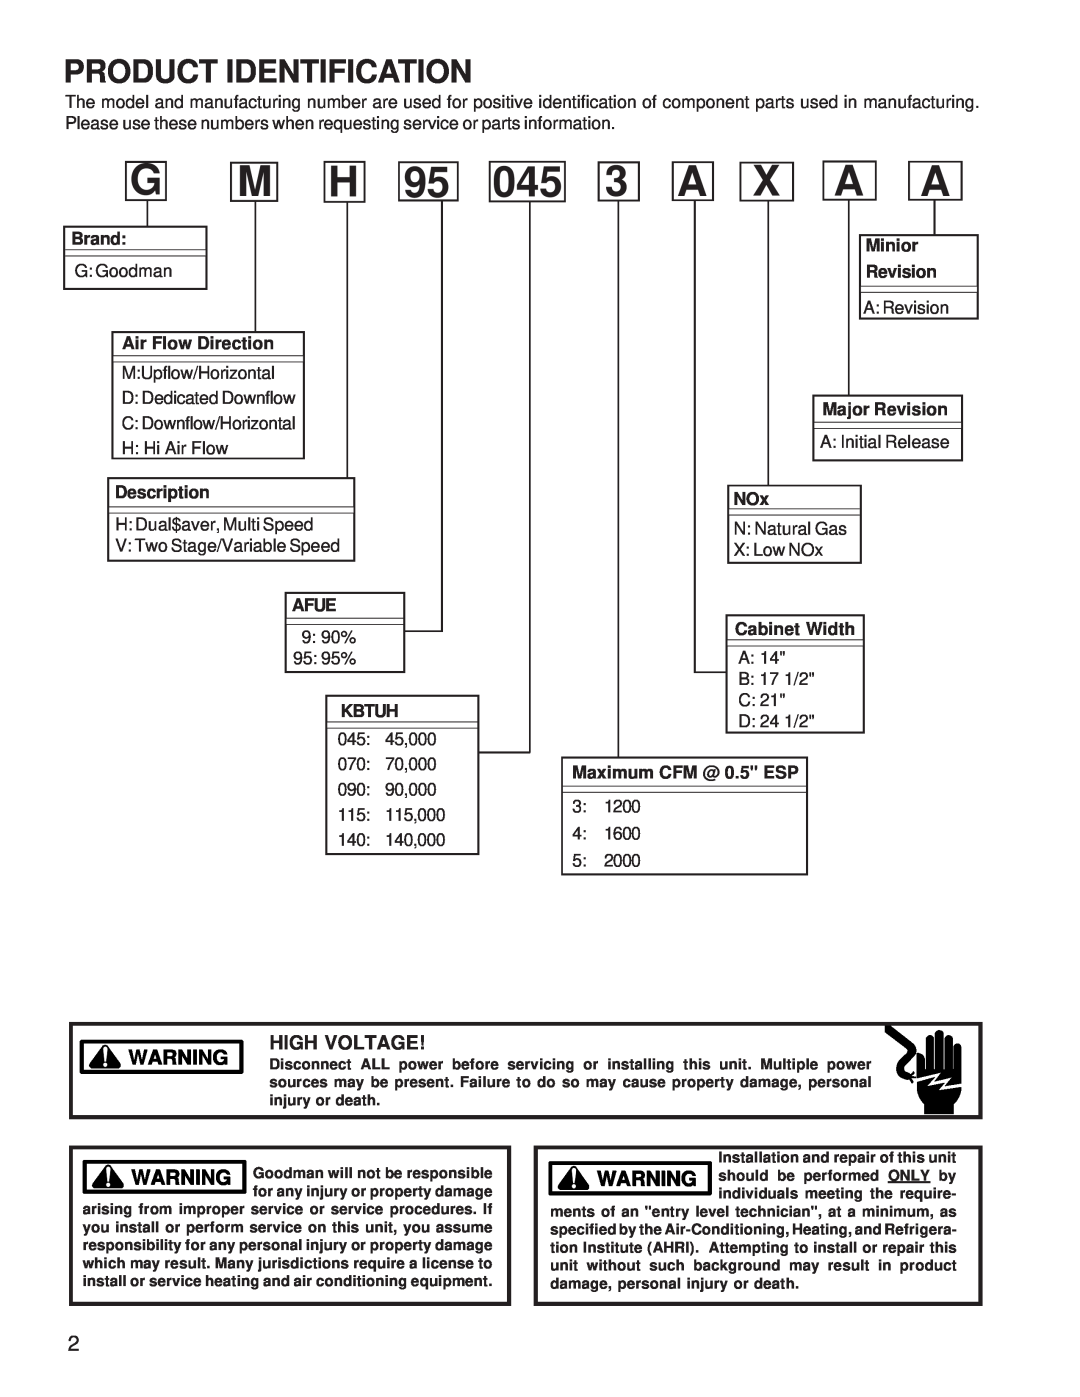 Goodman Mfg GMH95 service manual A X A A, Product Identification, High Voltage 